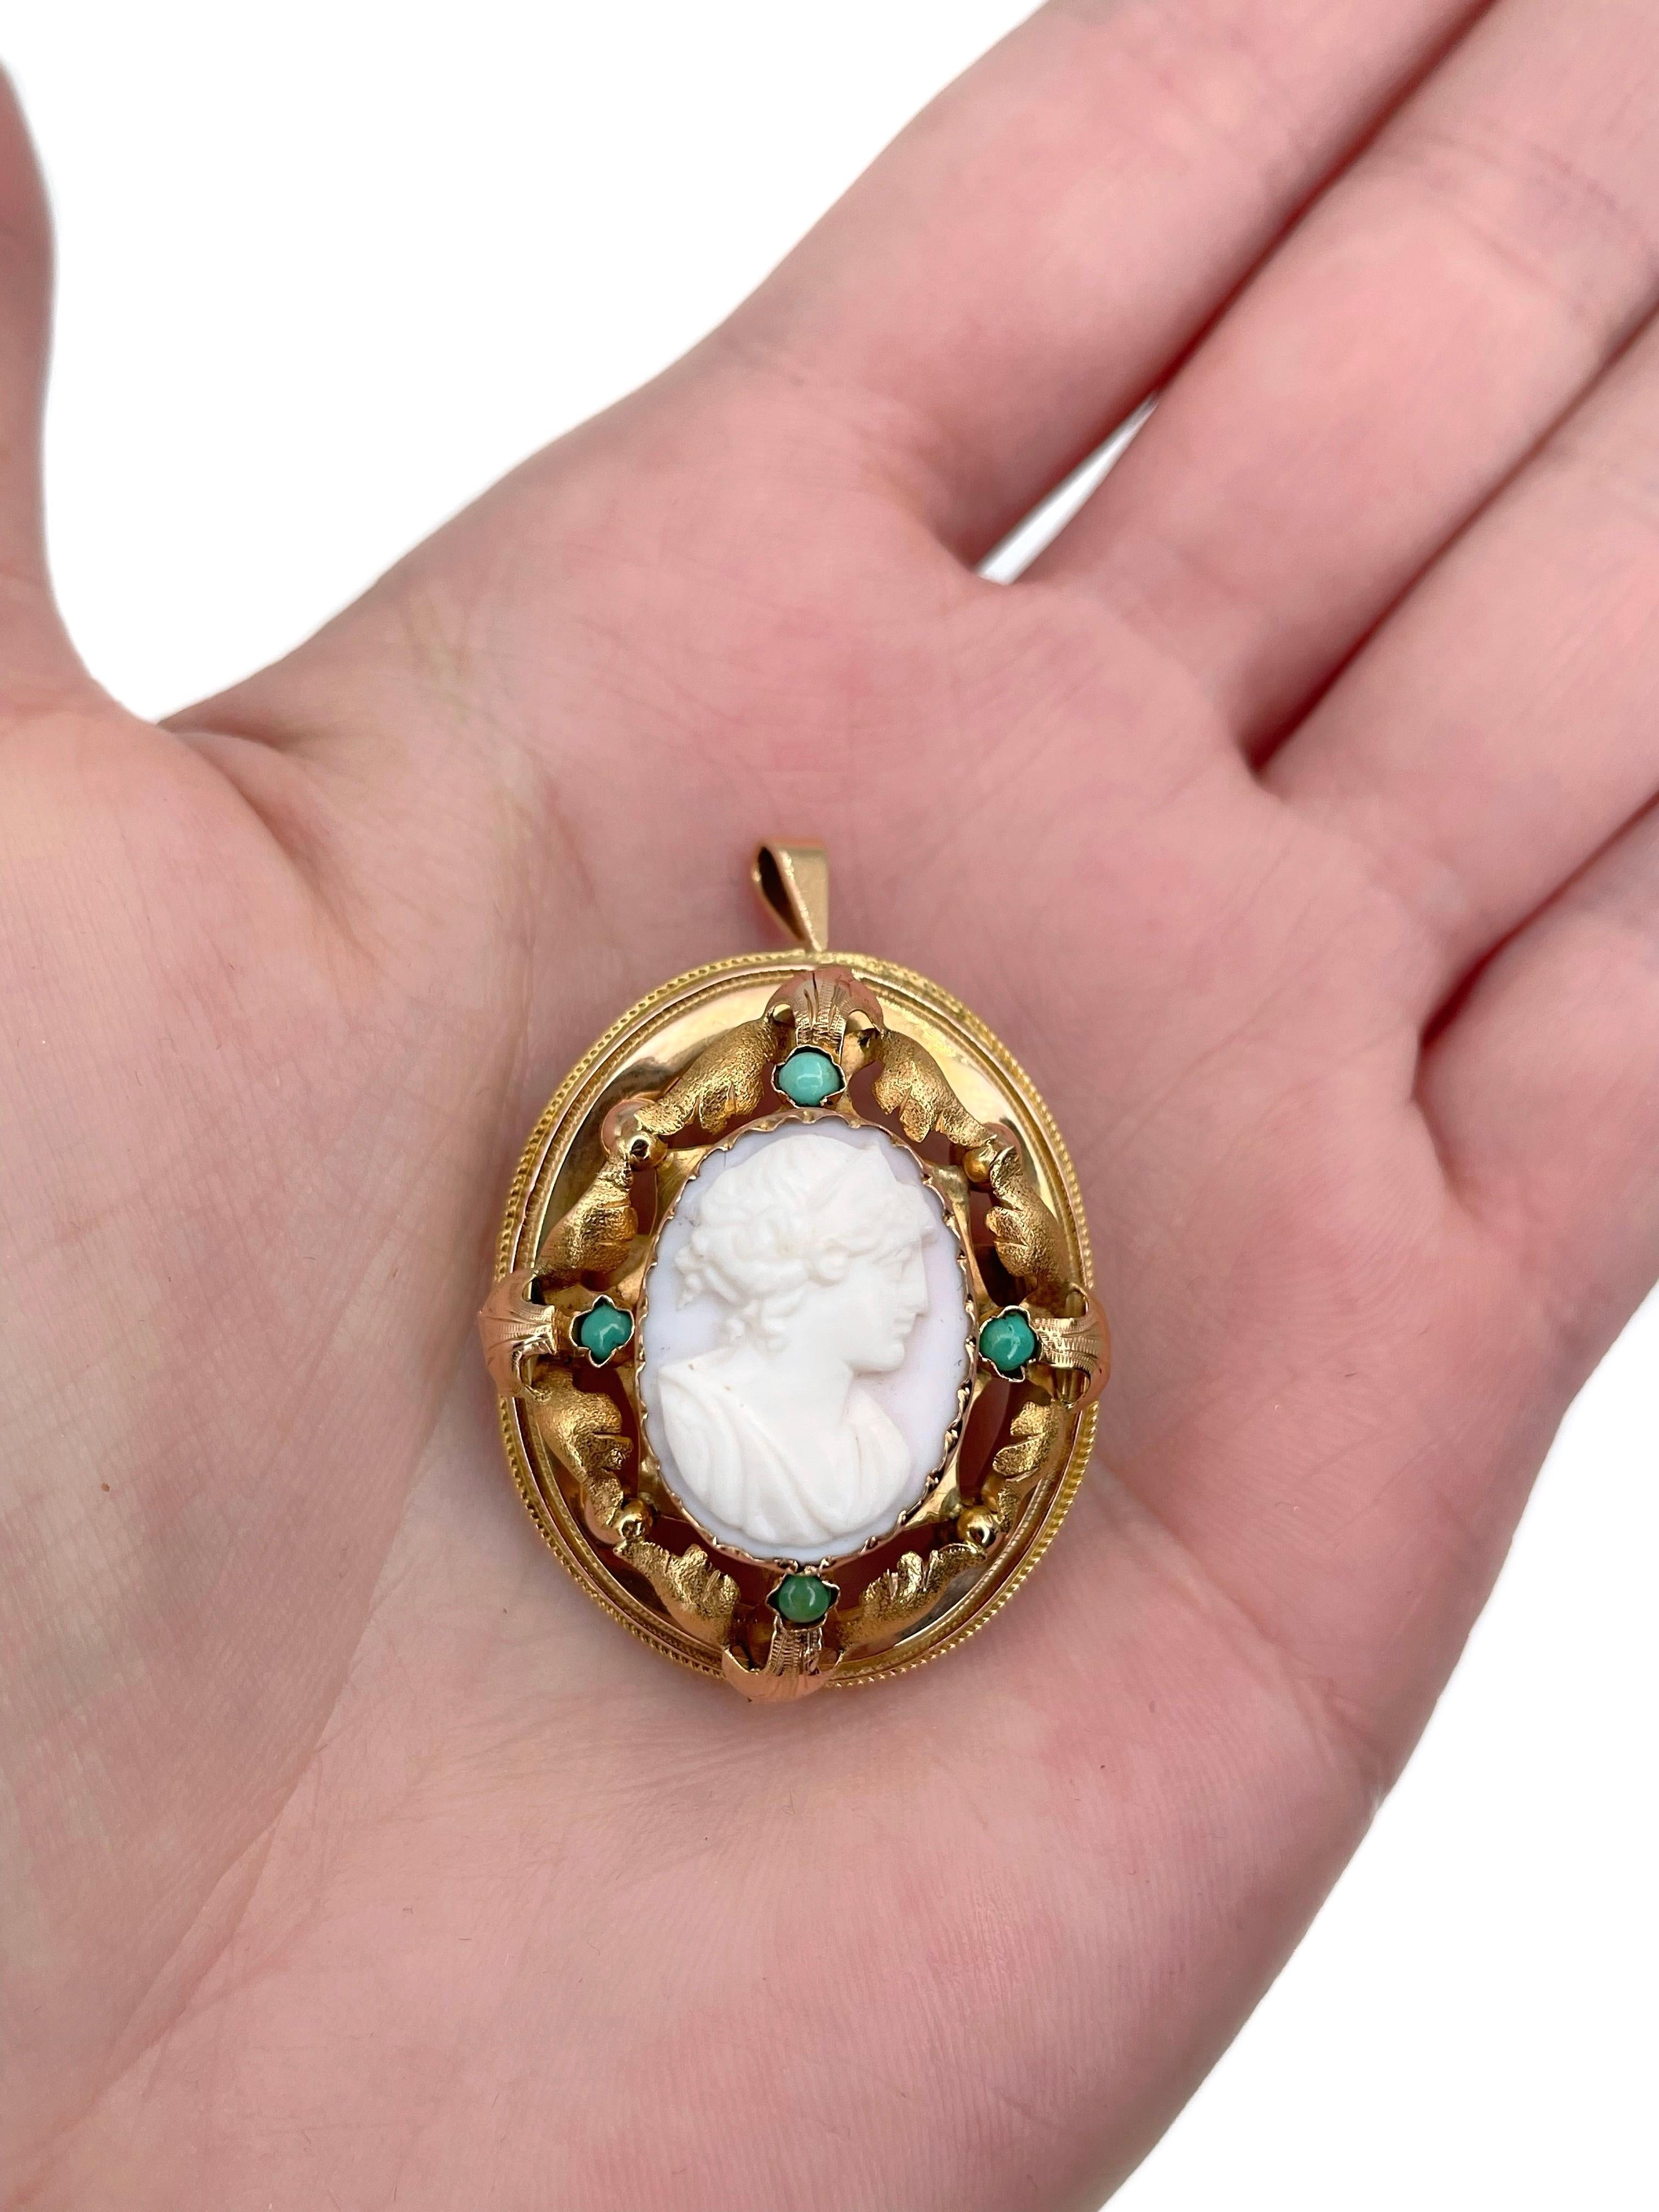 This is a Victorian pendant and pin brooch crafted in 18K gold. Circa 1890. 

It features a shell cameo depicting a lady.
The frame is adorned with 4 turquoises. 

Weight: 5.47g
Size: 4x2.5cm

———

If you have any questions, please feel free to ask.